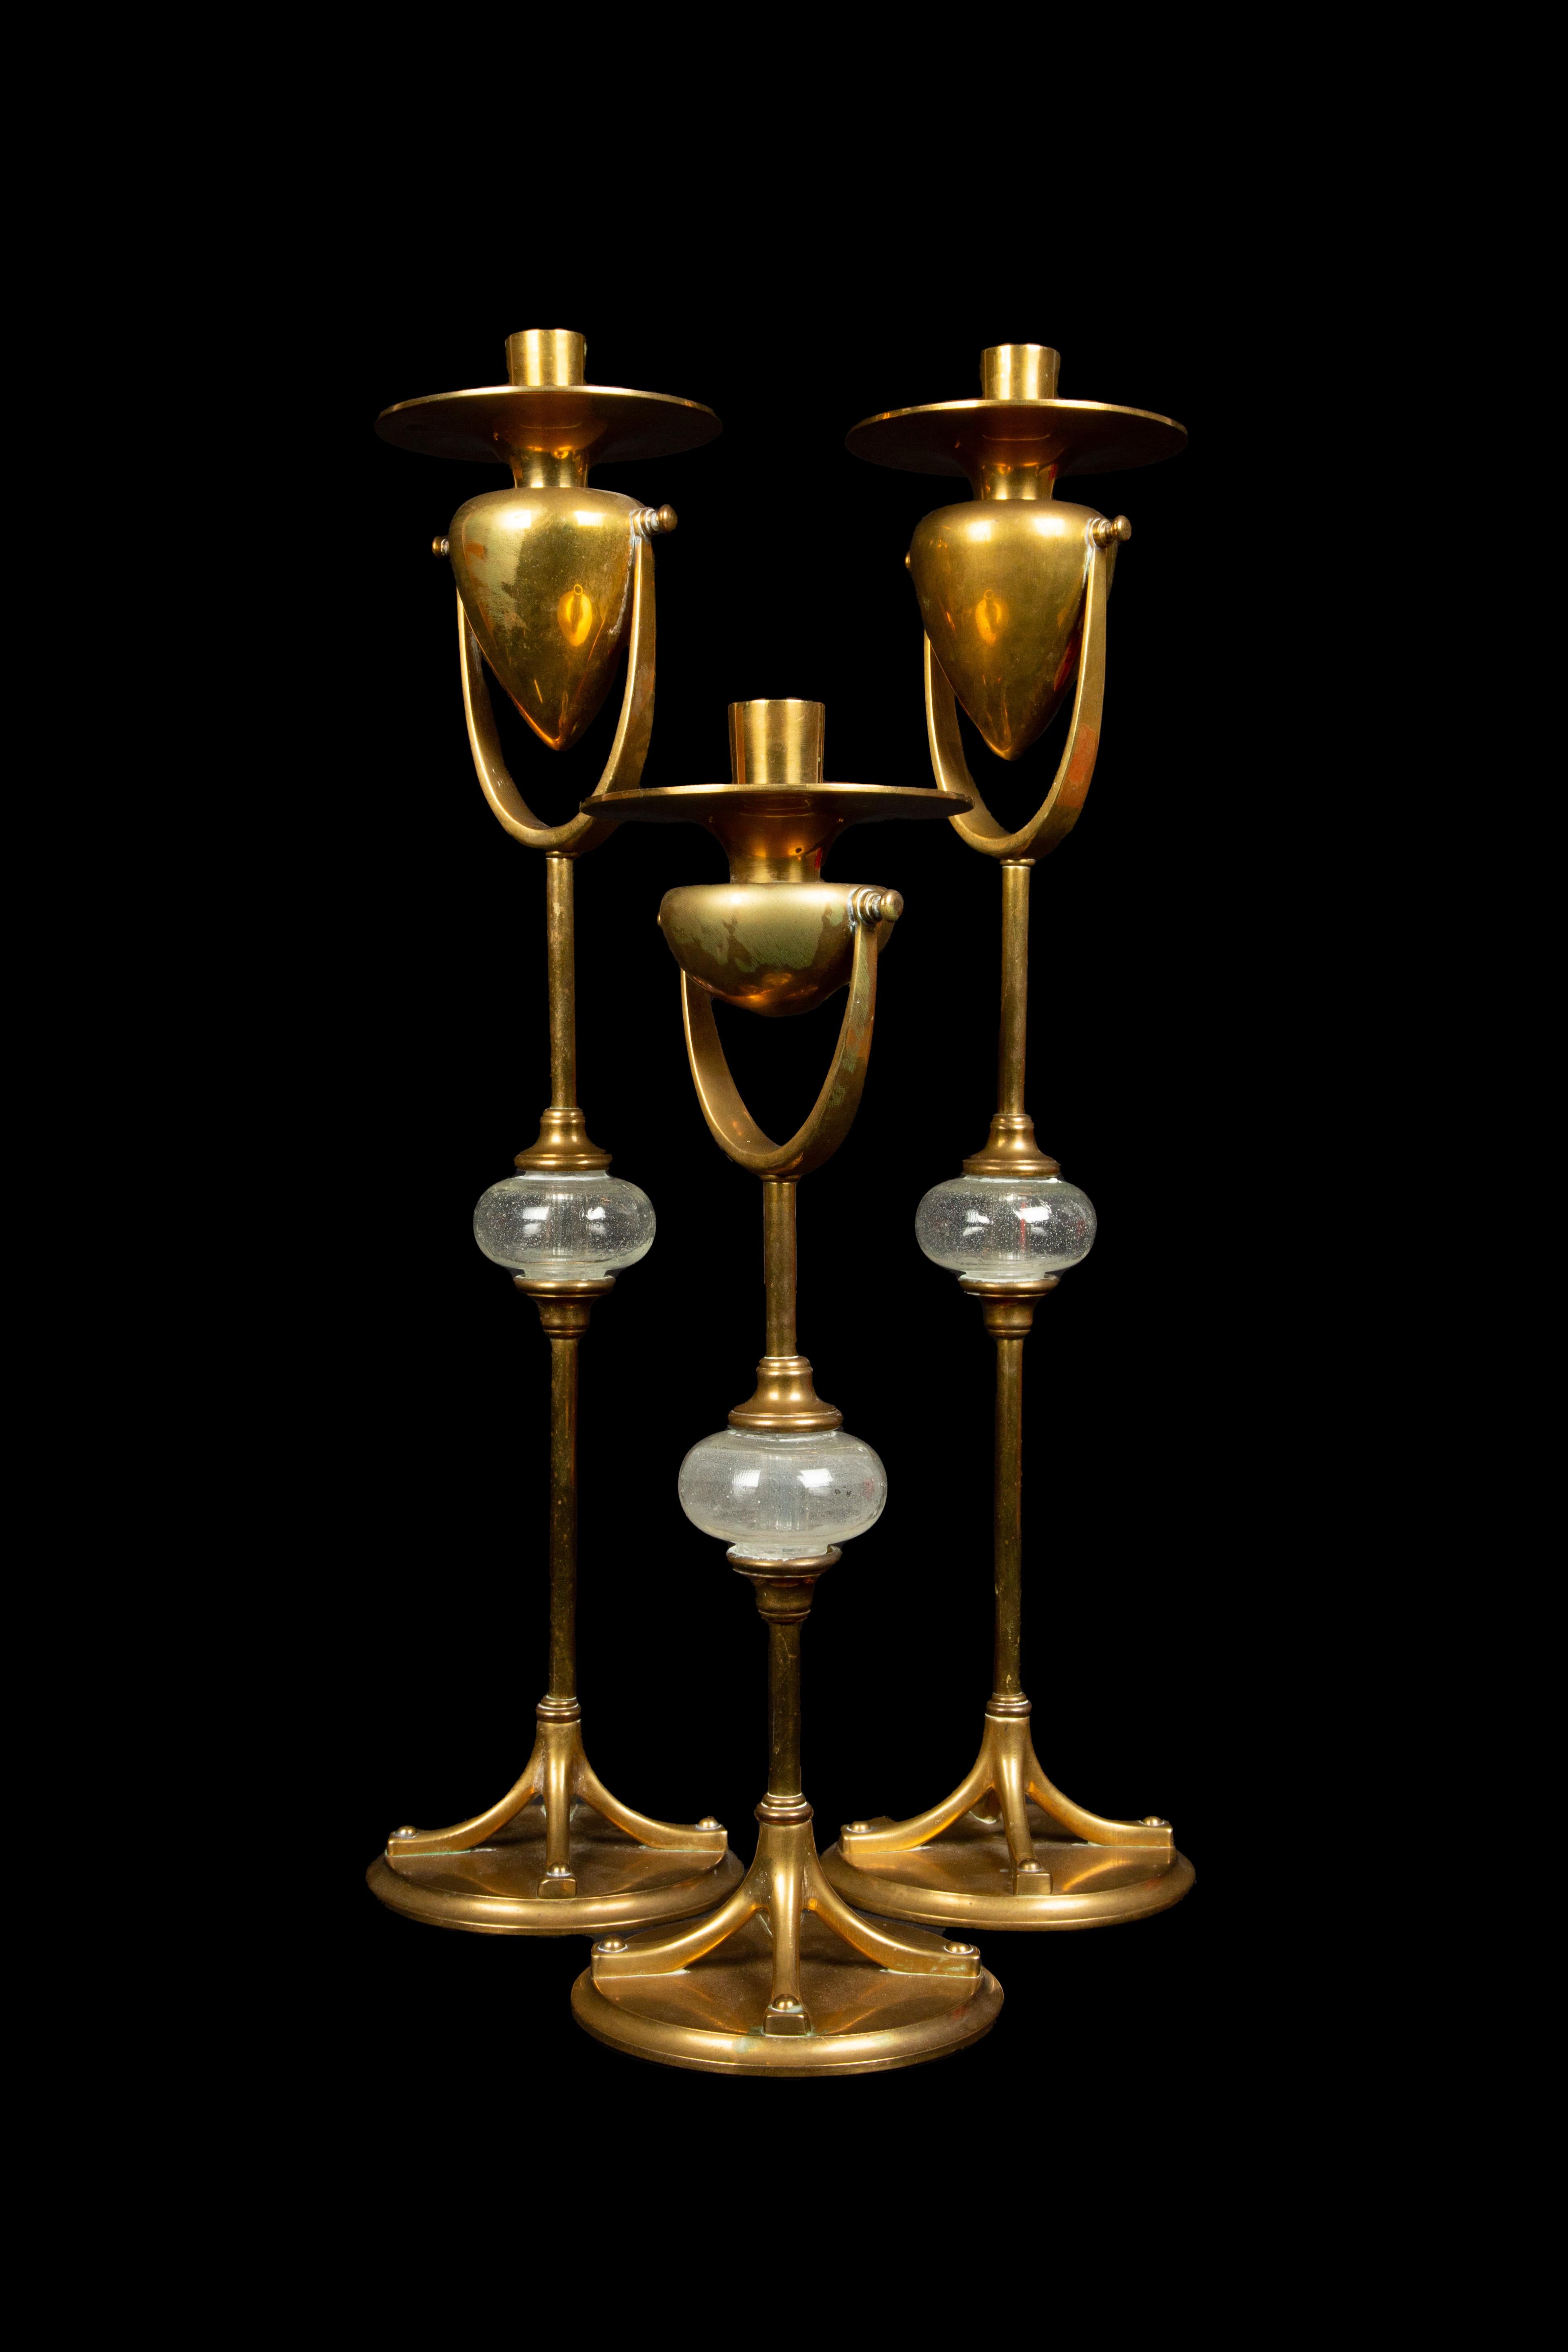 Inspired by the timeless elegance of the Tiffany model 1213 Art Nouveau candlesticks, these Chapman candlesticks truly embody magnificence. Meticulously crafted, these candlesticks boast a strikingly tall scale and a solid brass construction that